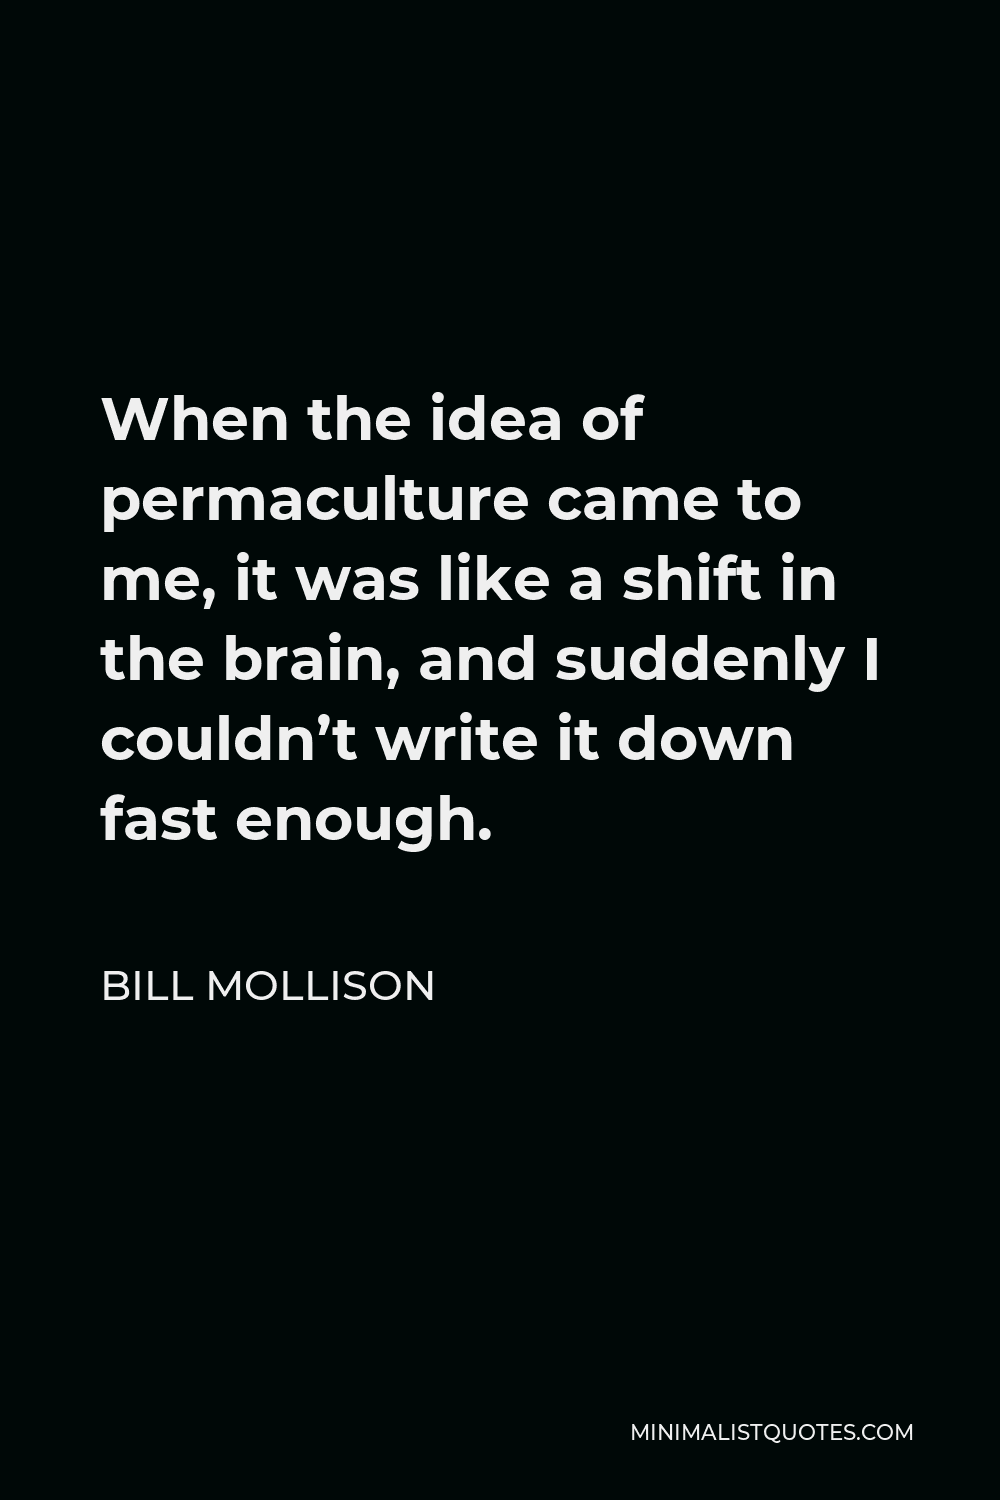 Bill Mollison Quote - When the idea of permaculture came to me, it was like a shift in the brain, and suddenly I couldn’t write it down fast enough.